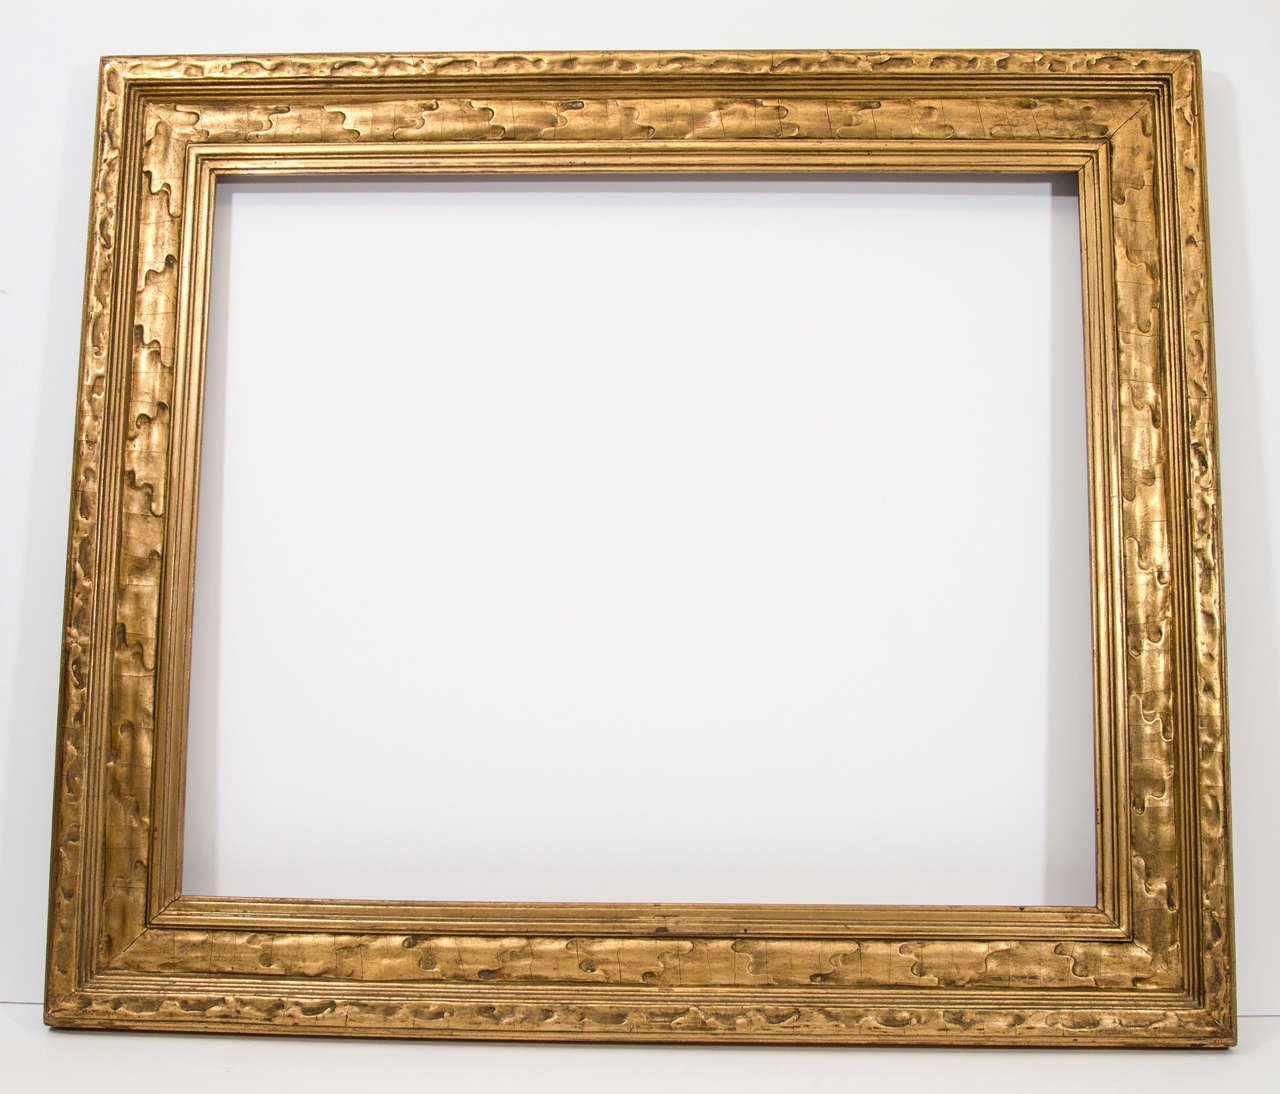 Arts & Crafts era composition frame by Newcomb-Macklin with splined corners

Exterior dimensions: 30 1/2 x 26 1/2 inches
Rabbet dimensions: 24 1/4 x 20 1/4 inches
Moulding width: 3 1/2 inches